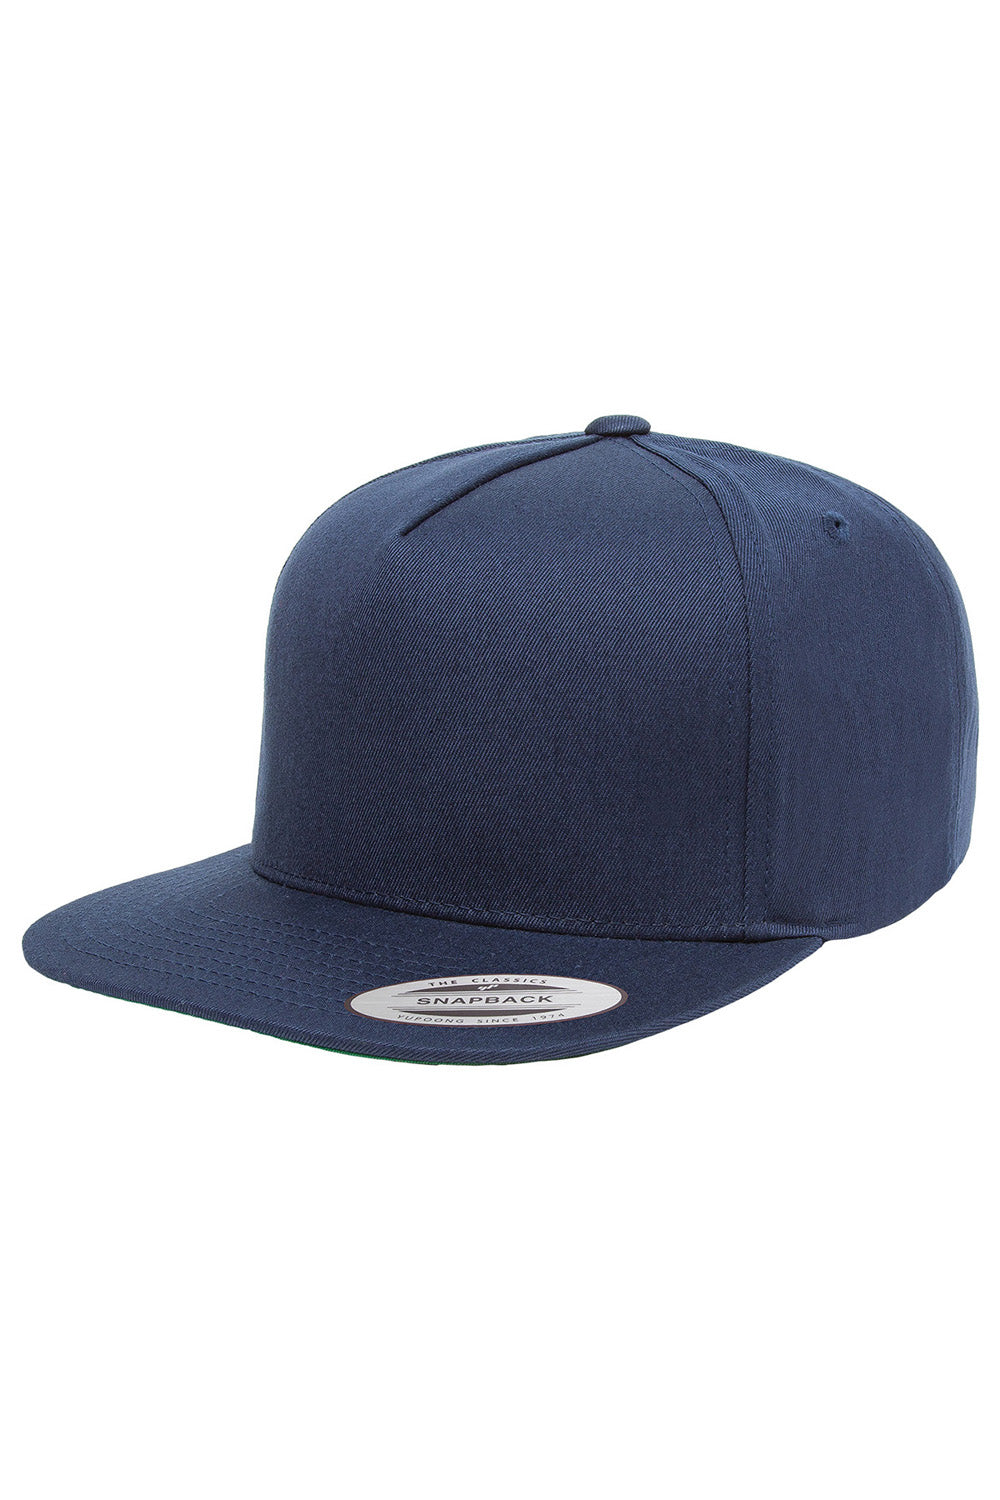 Yupoong Y6007 Mens Adjustable Hat Navy Blue Front